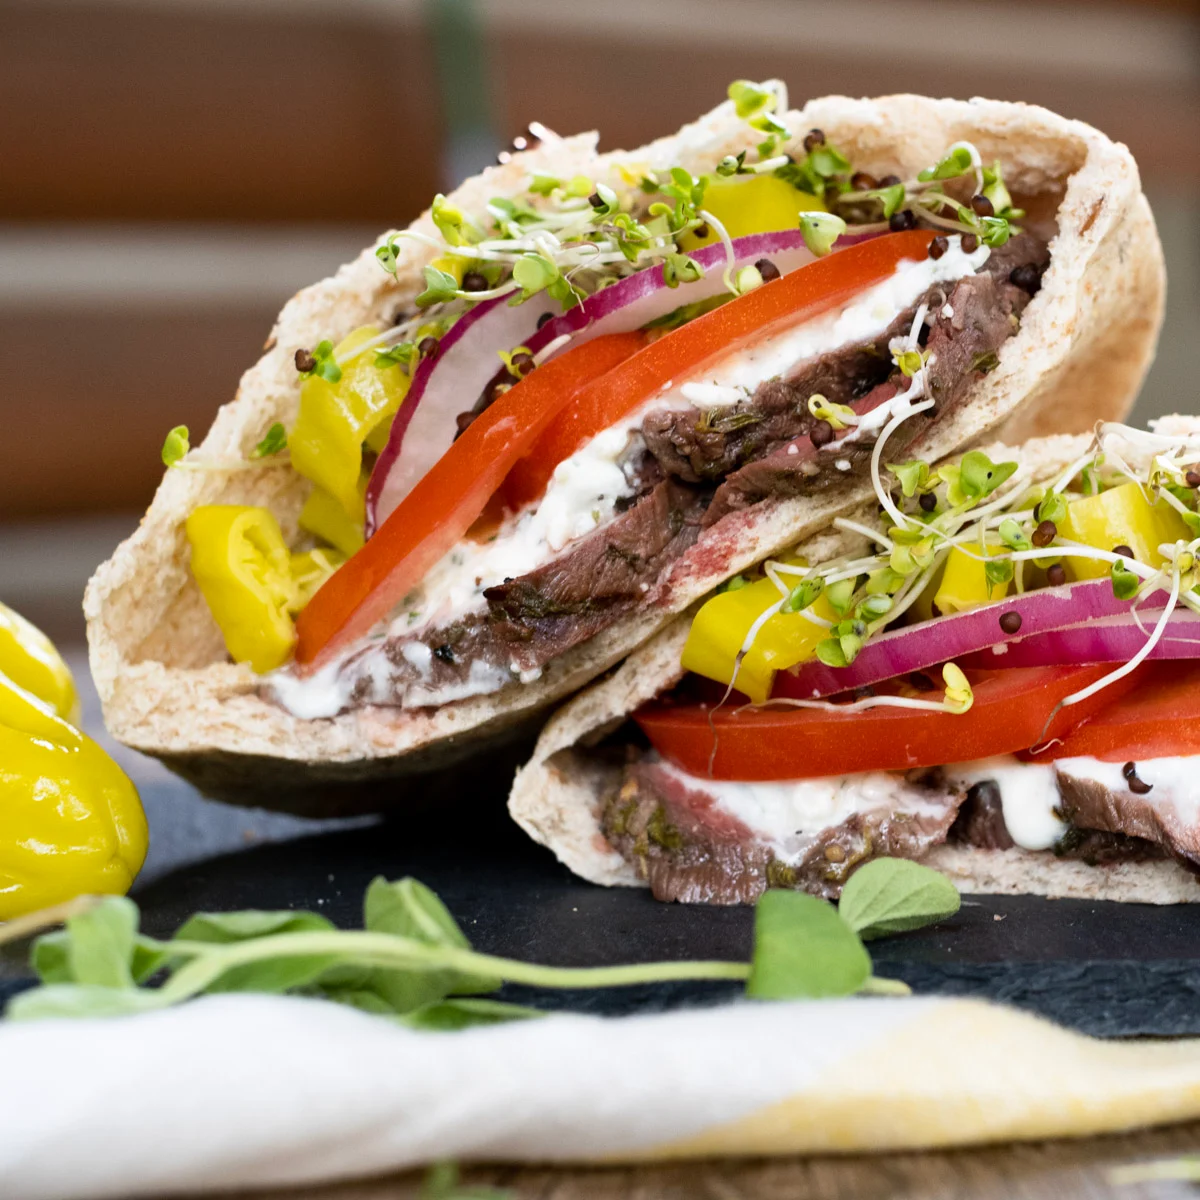 Two open pita pockets filled with pronghorn meat, lettuce, tomato and white tzatsiki sauce.